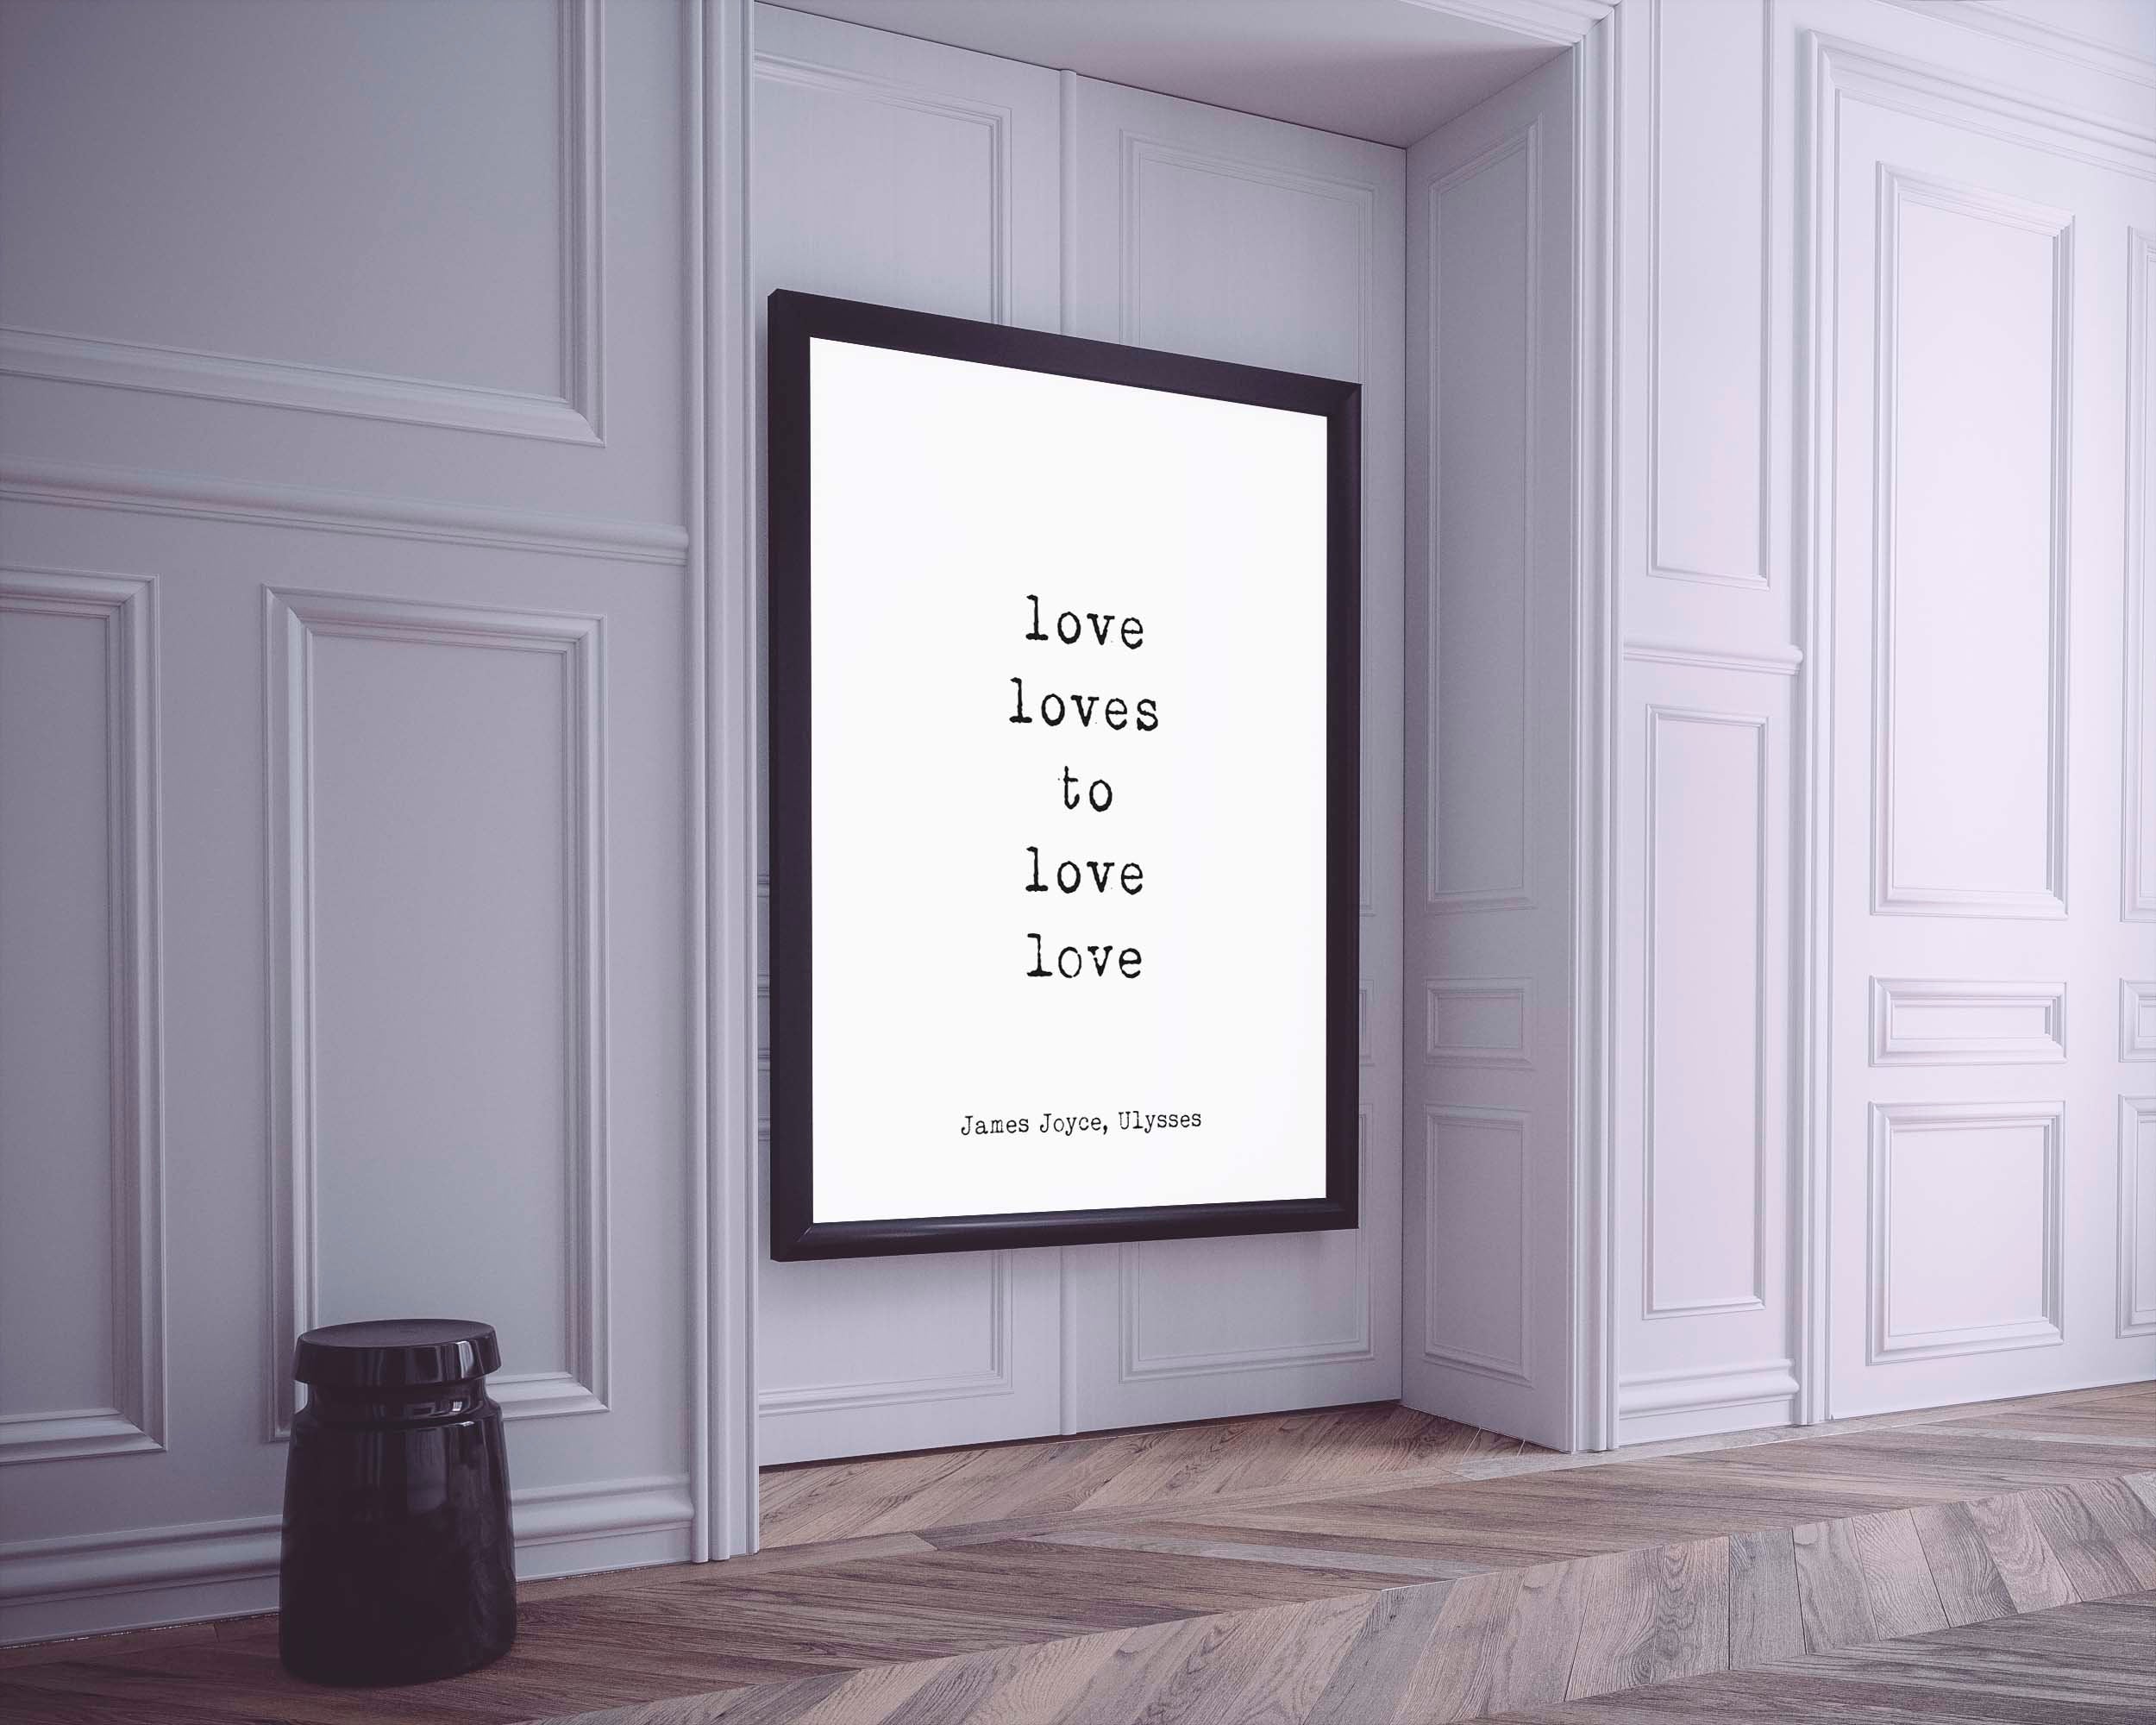 Love Loves to Love James Joyce Quote Wall Art Prints, Unframed Ulysses Wall Decor in Black and White